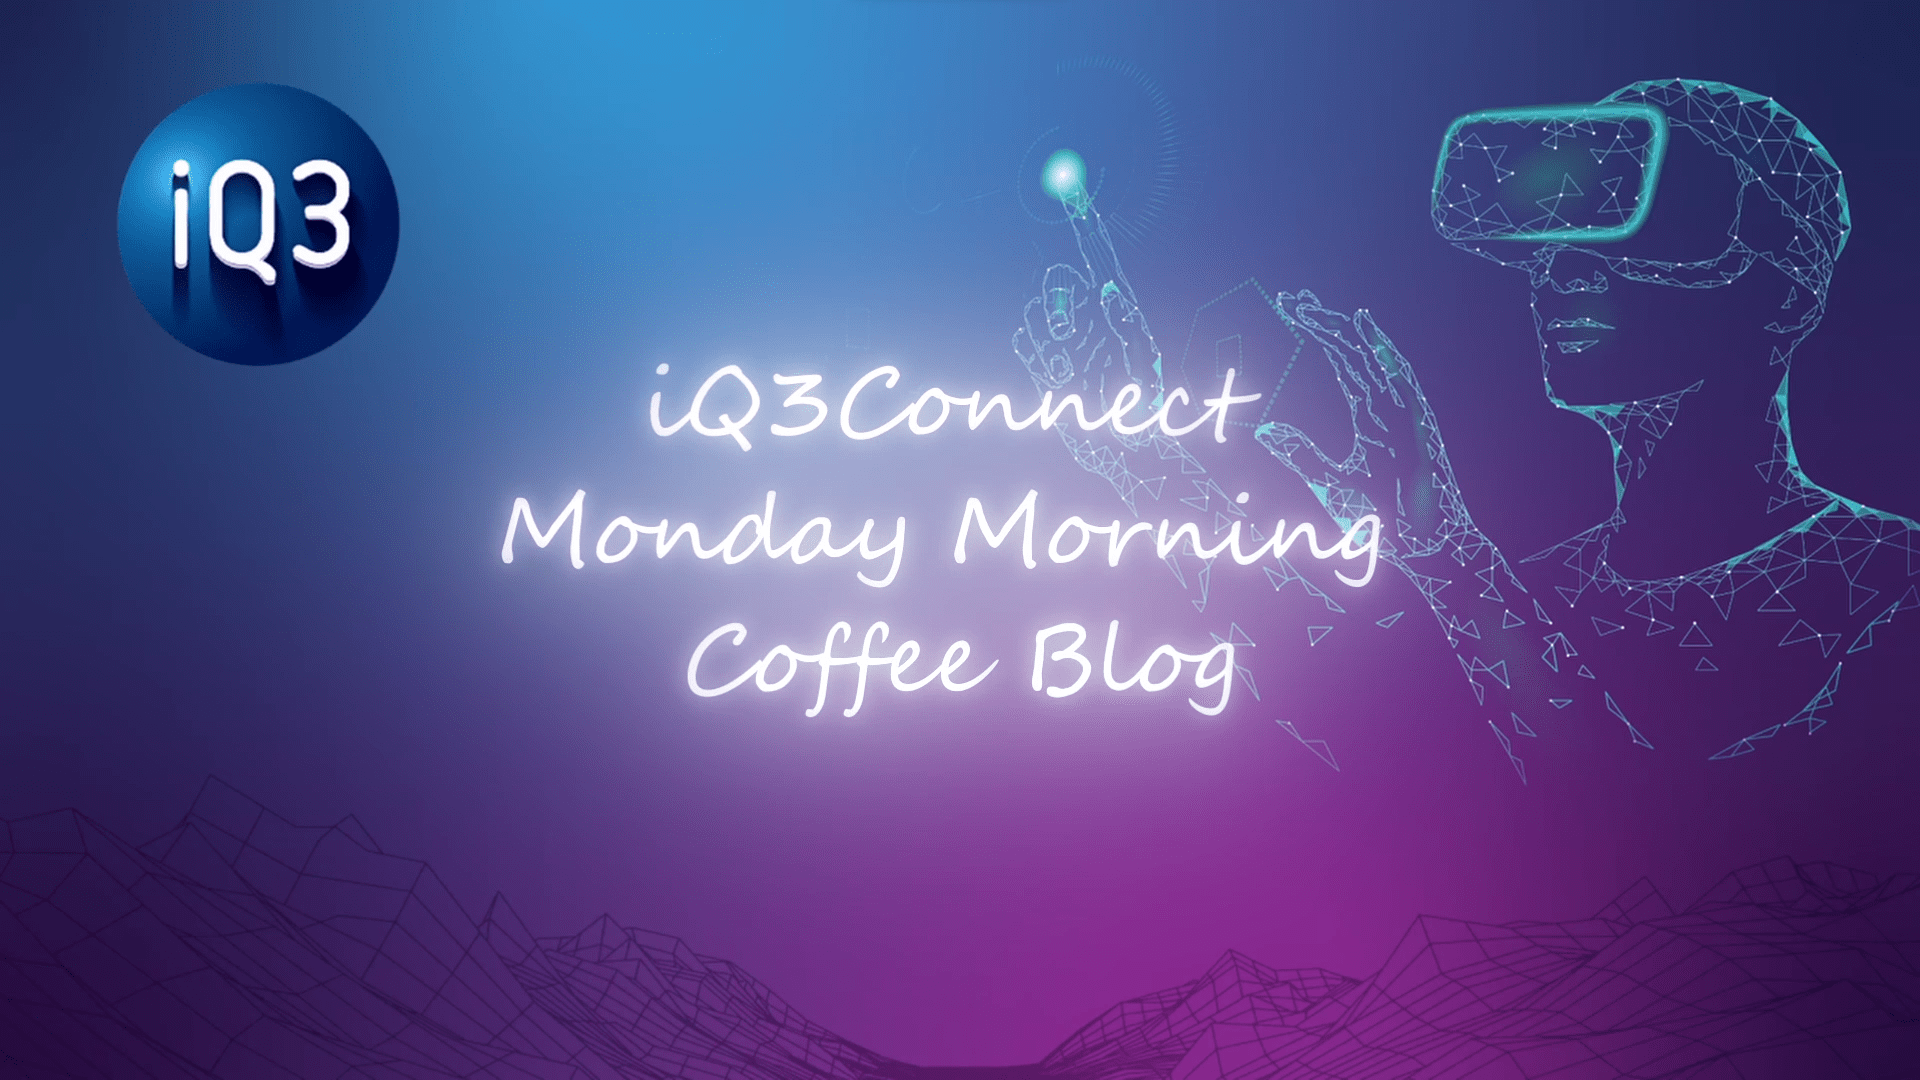 Monday Morning Coffee Blog - Access and Deployment